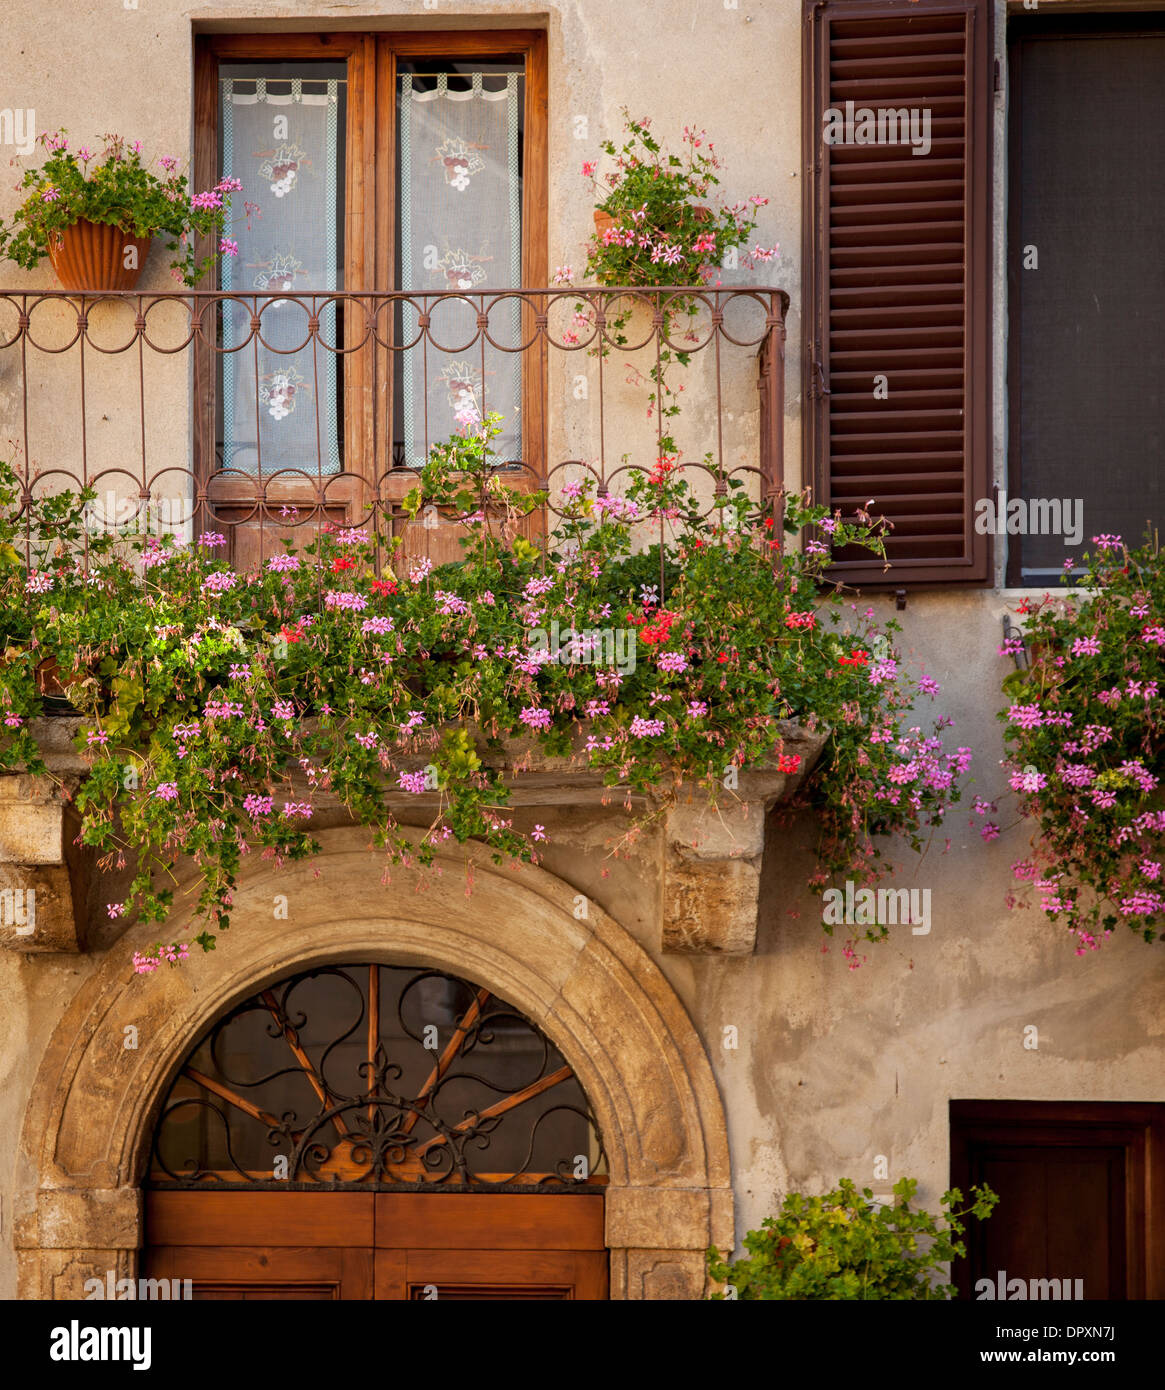 Flowers on balcony over front door to home in Piezna, Tuscany, Italy Stock Photo